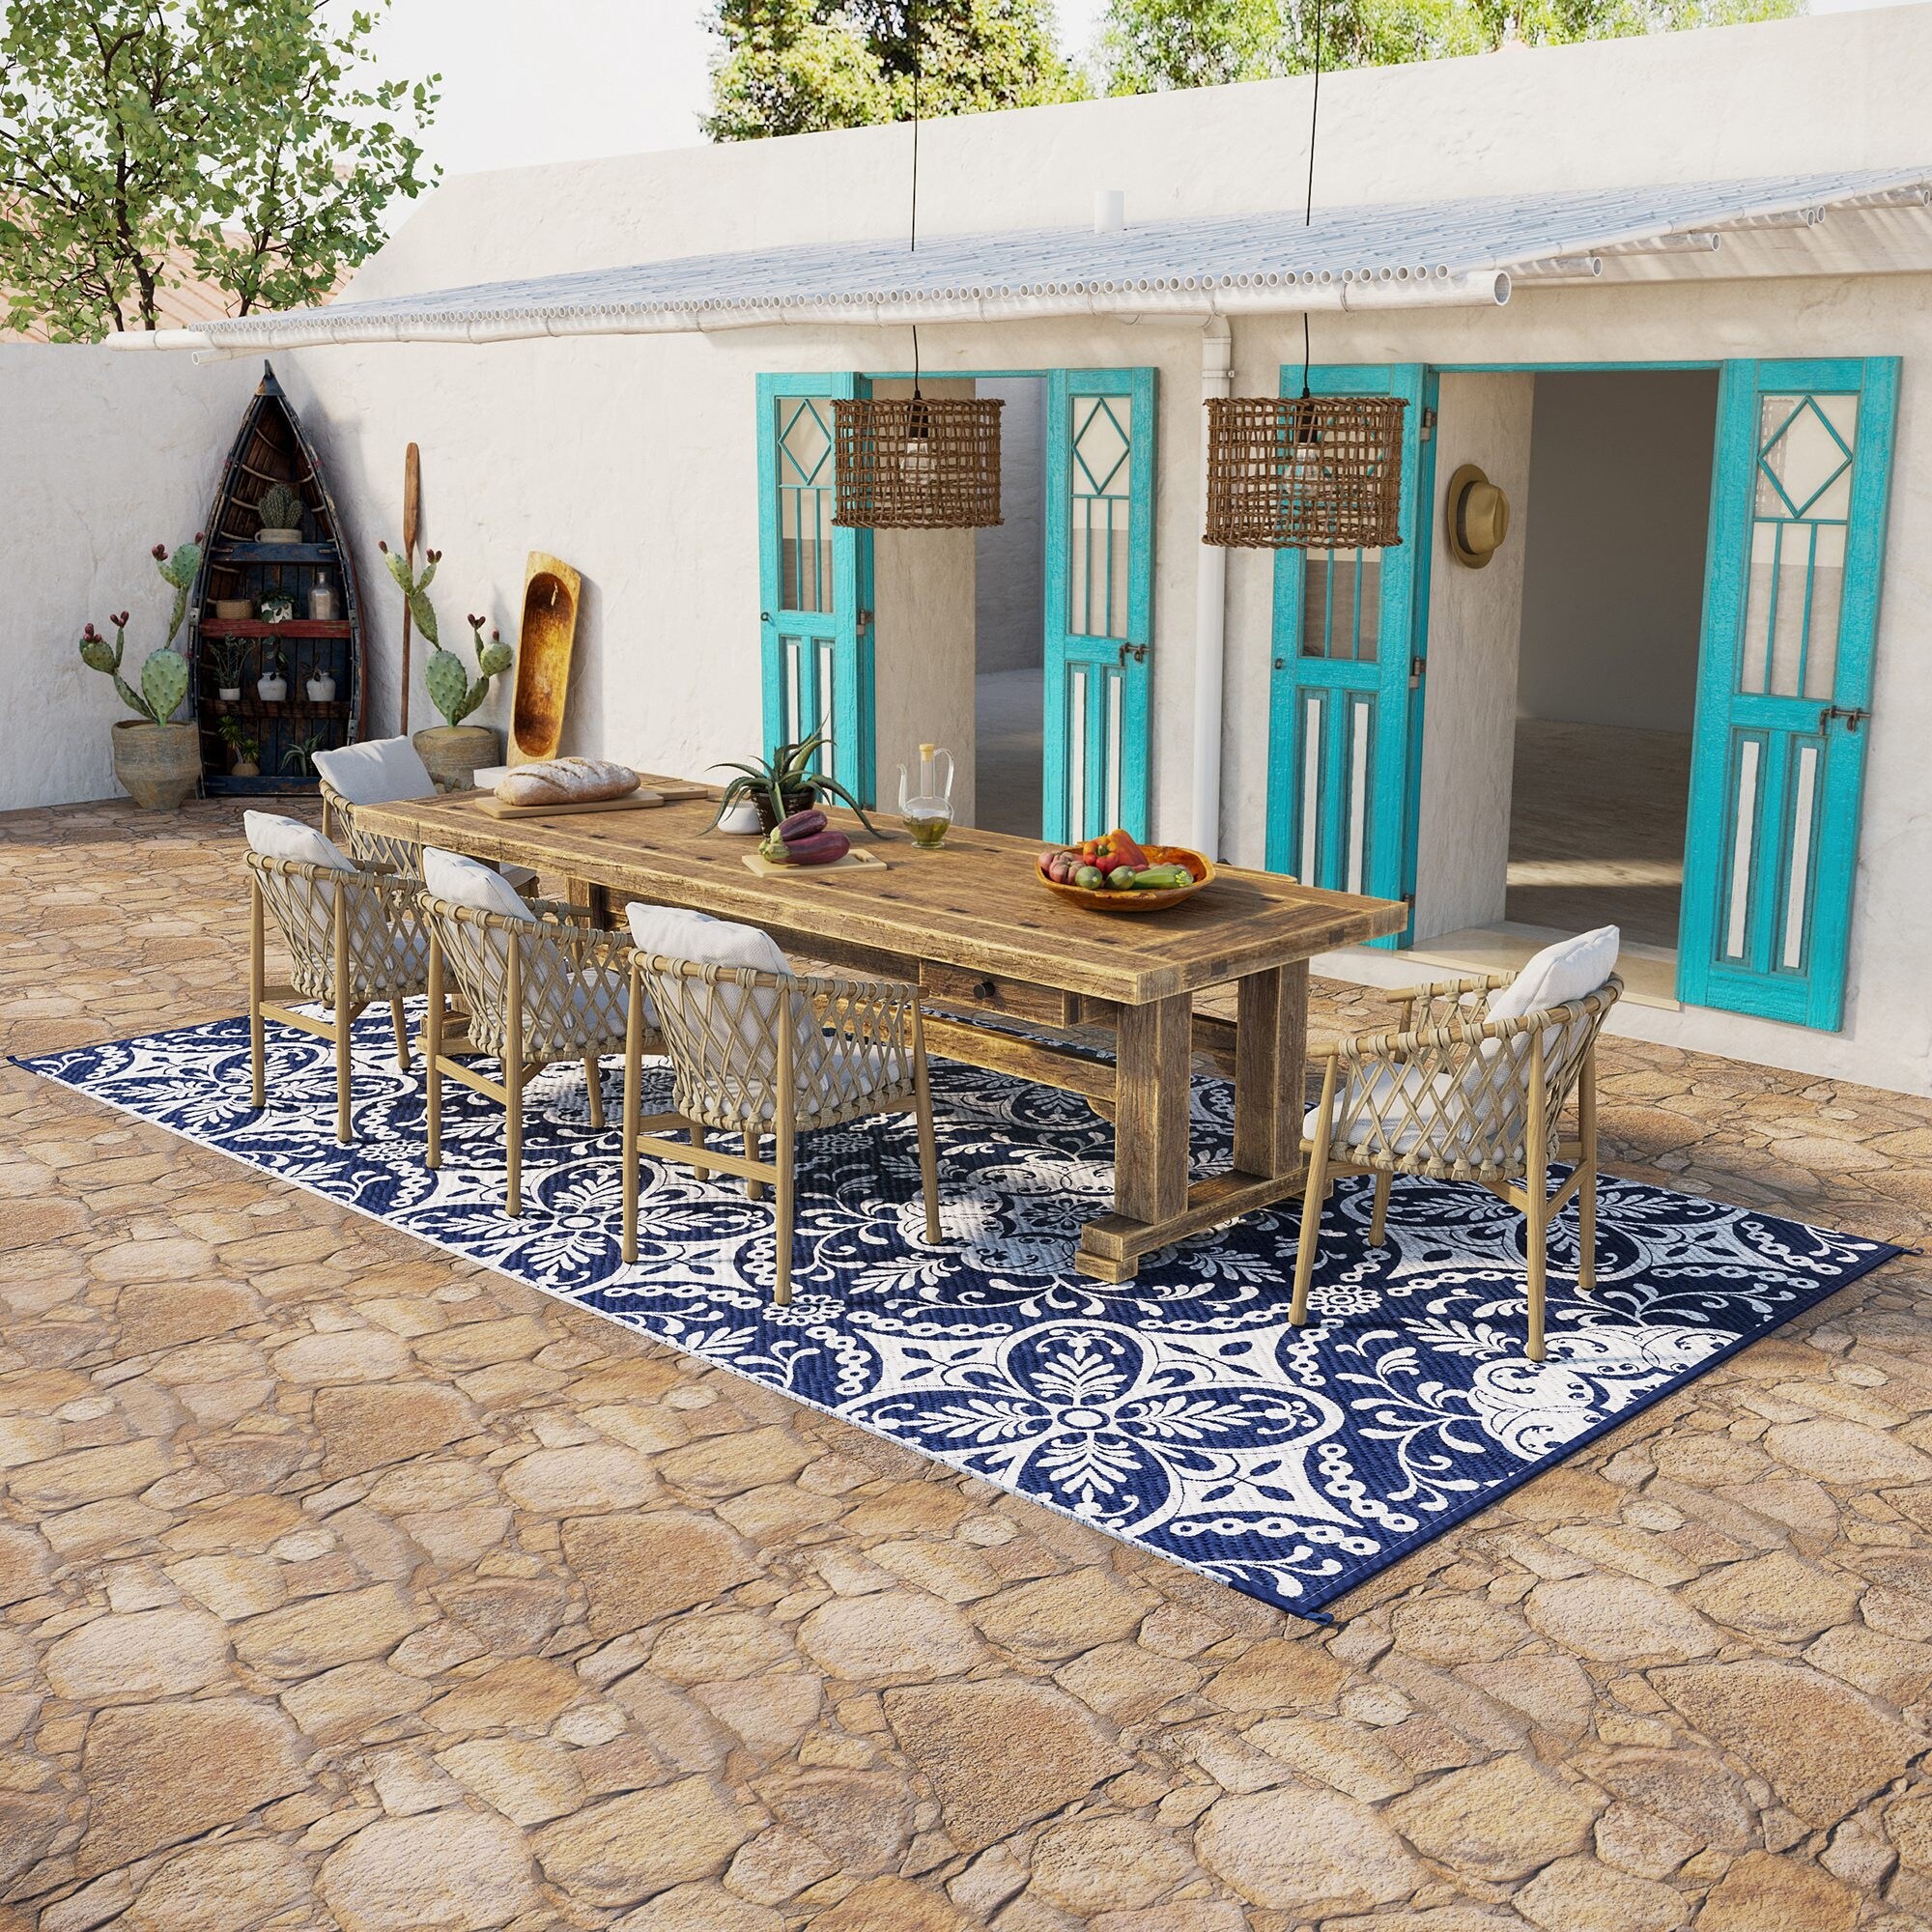 https://ak1.ostkcdn.com/images/products/is/images/direct/d49fa590f4890e5b13e5c4ec80662c051e07833f/Outsunny-RV-Mat%2C-Outdoor-Patio-Rug---Large-Camping-Carpet-with-Carrying-Bag%2C-9%27-x-18%27%2C-Waterproof-Plastic-Straw.jpg